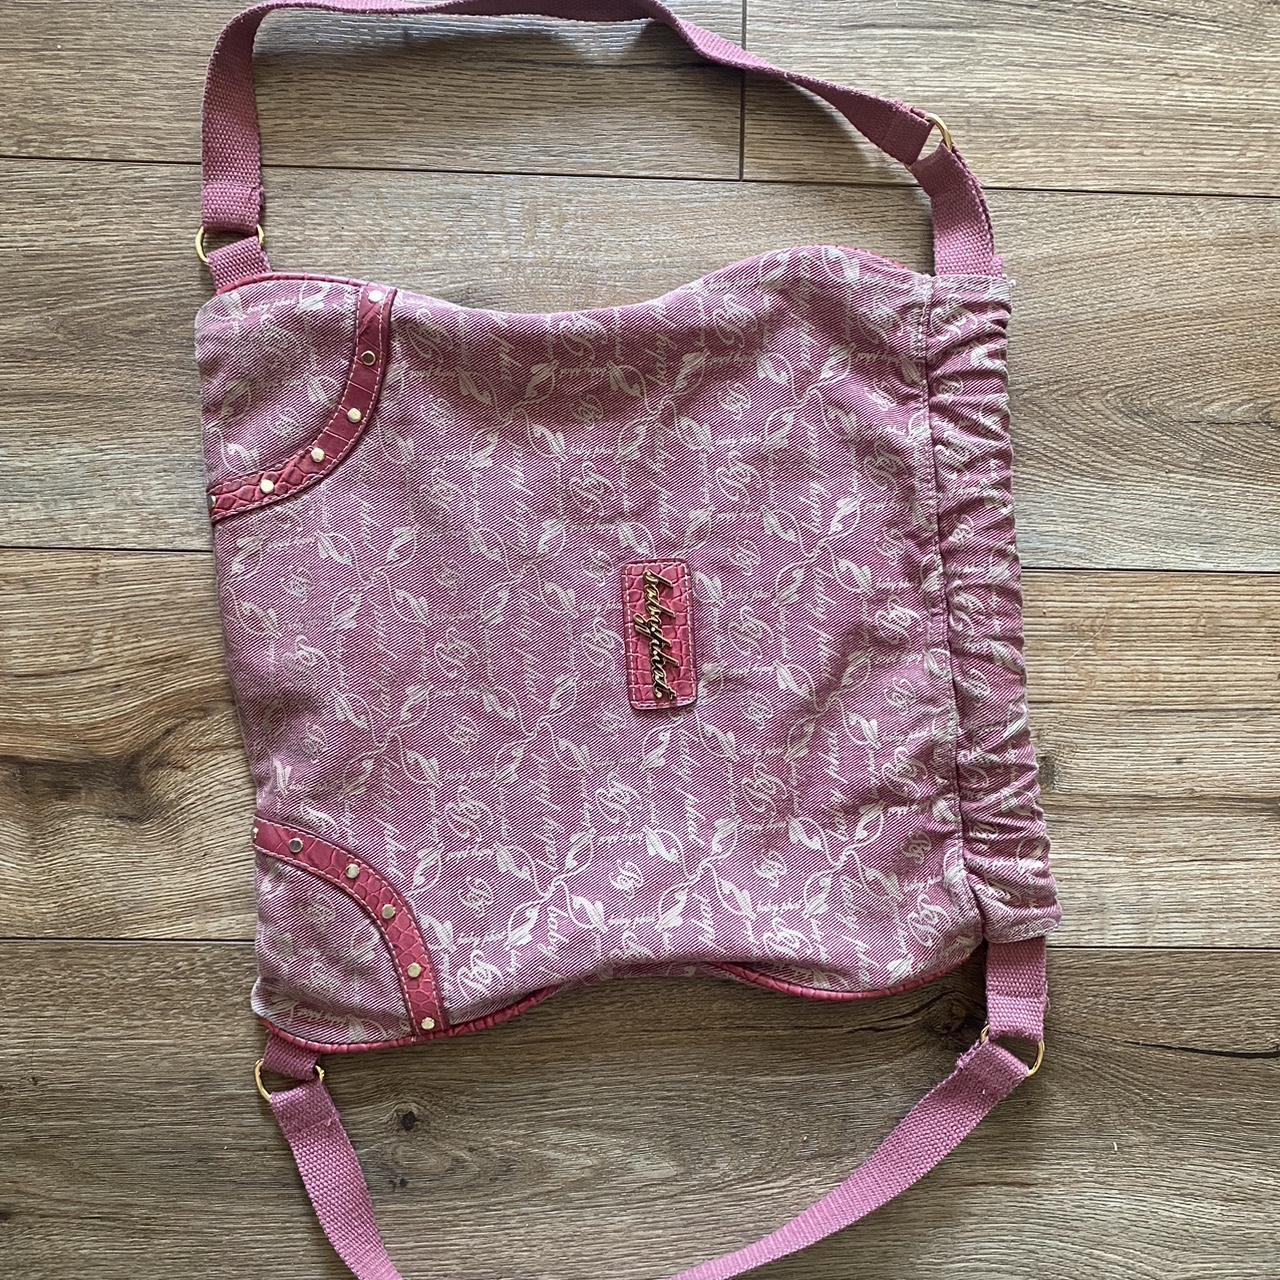 Baby Phat Women's Pink and Gold Bag | Depop